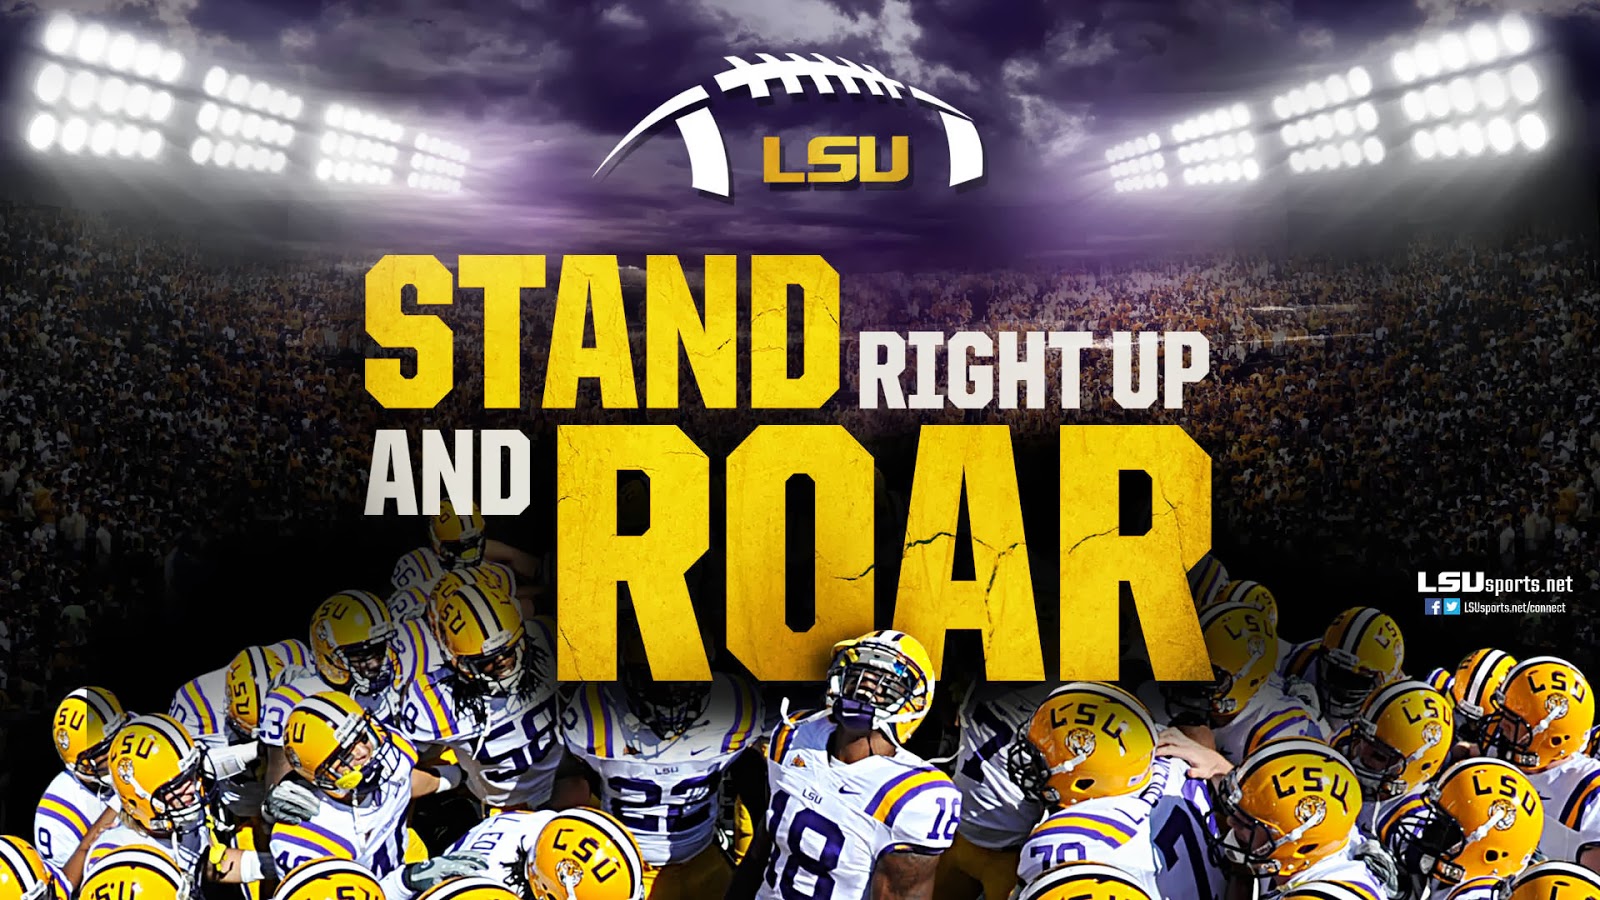 Get Lsu Football Wallpaper And Make This For